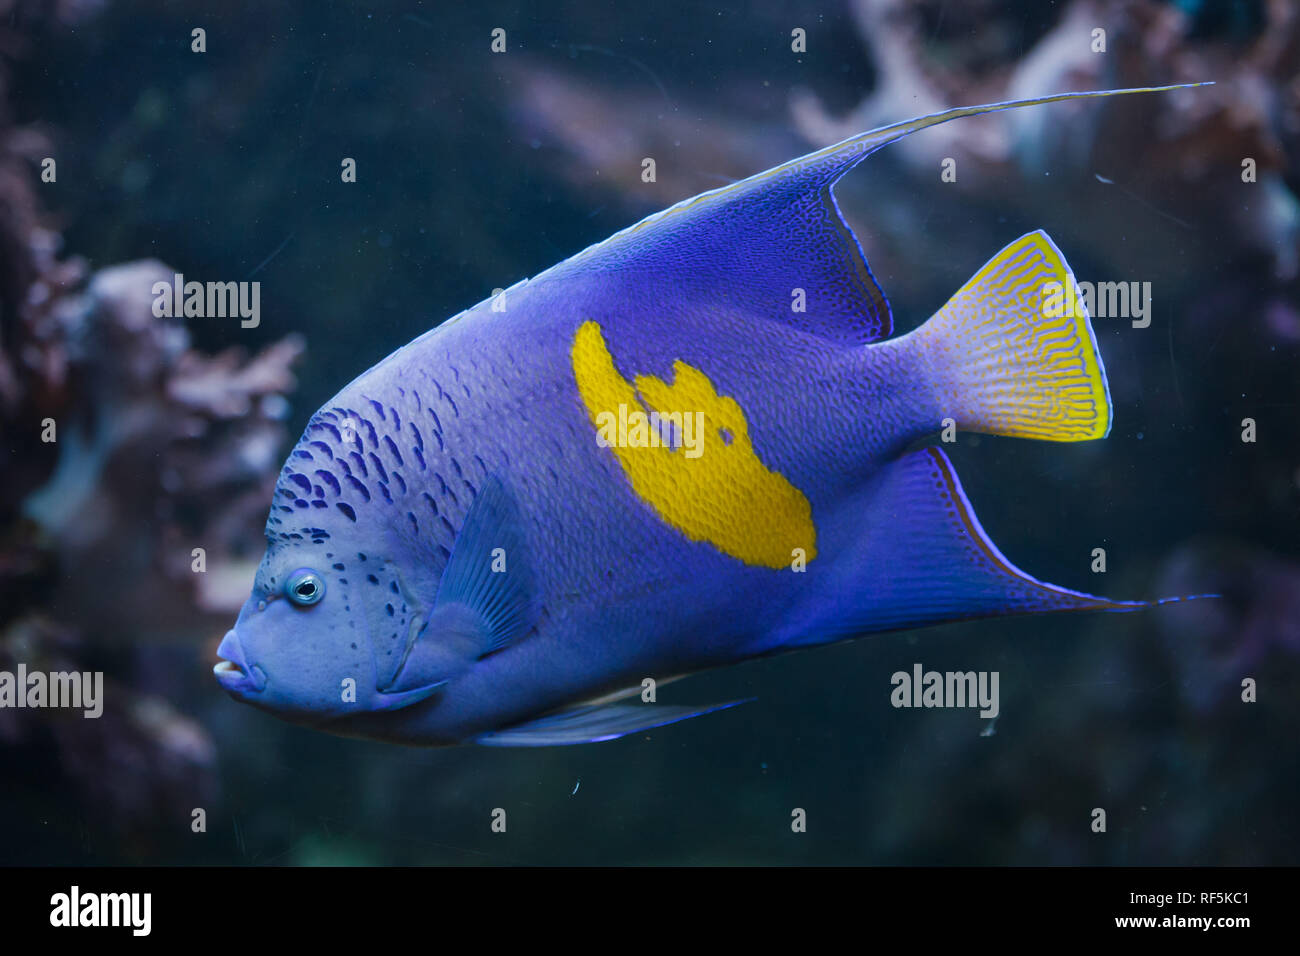 Yellowband angelfish (Pomacanthus maculosus), also known as the halfmoon angelfish. Stock Photo